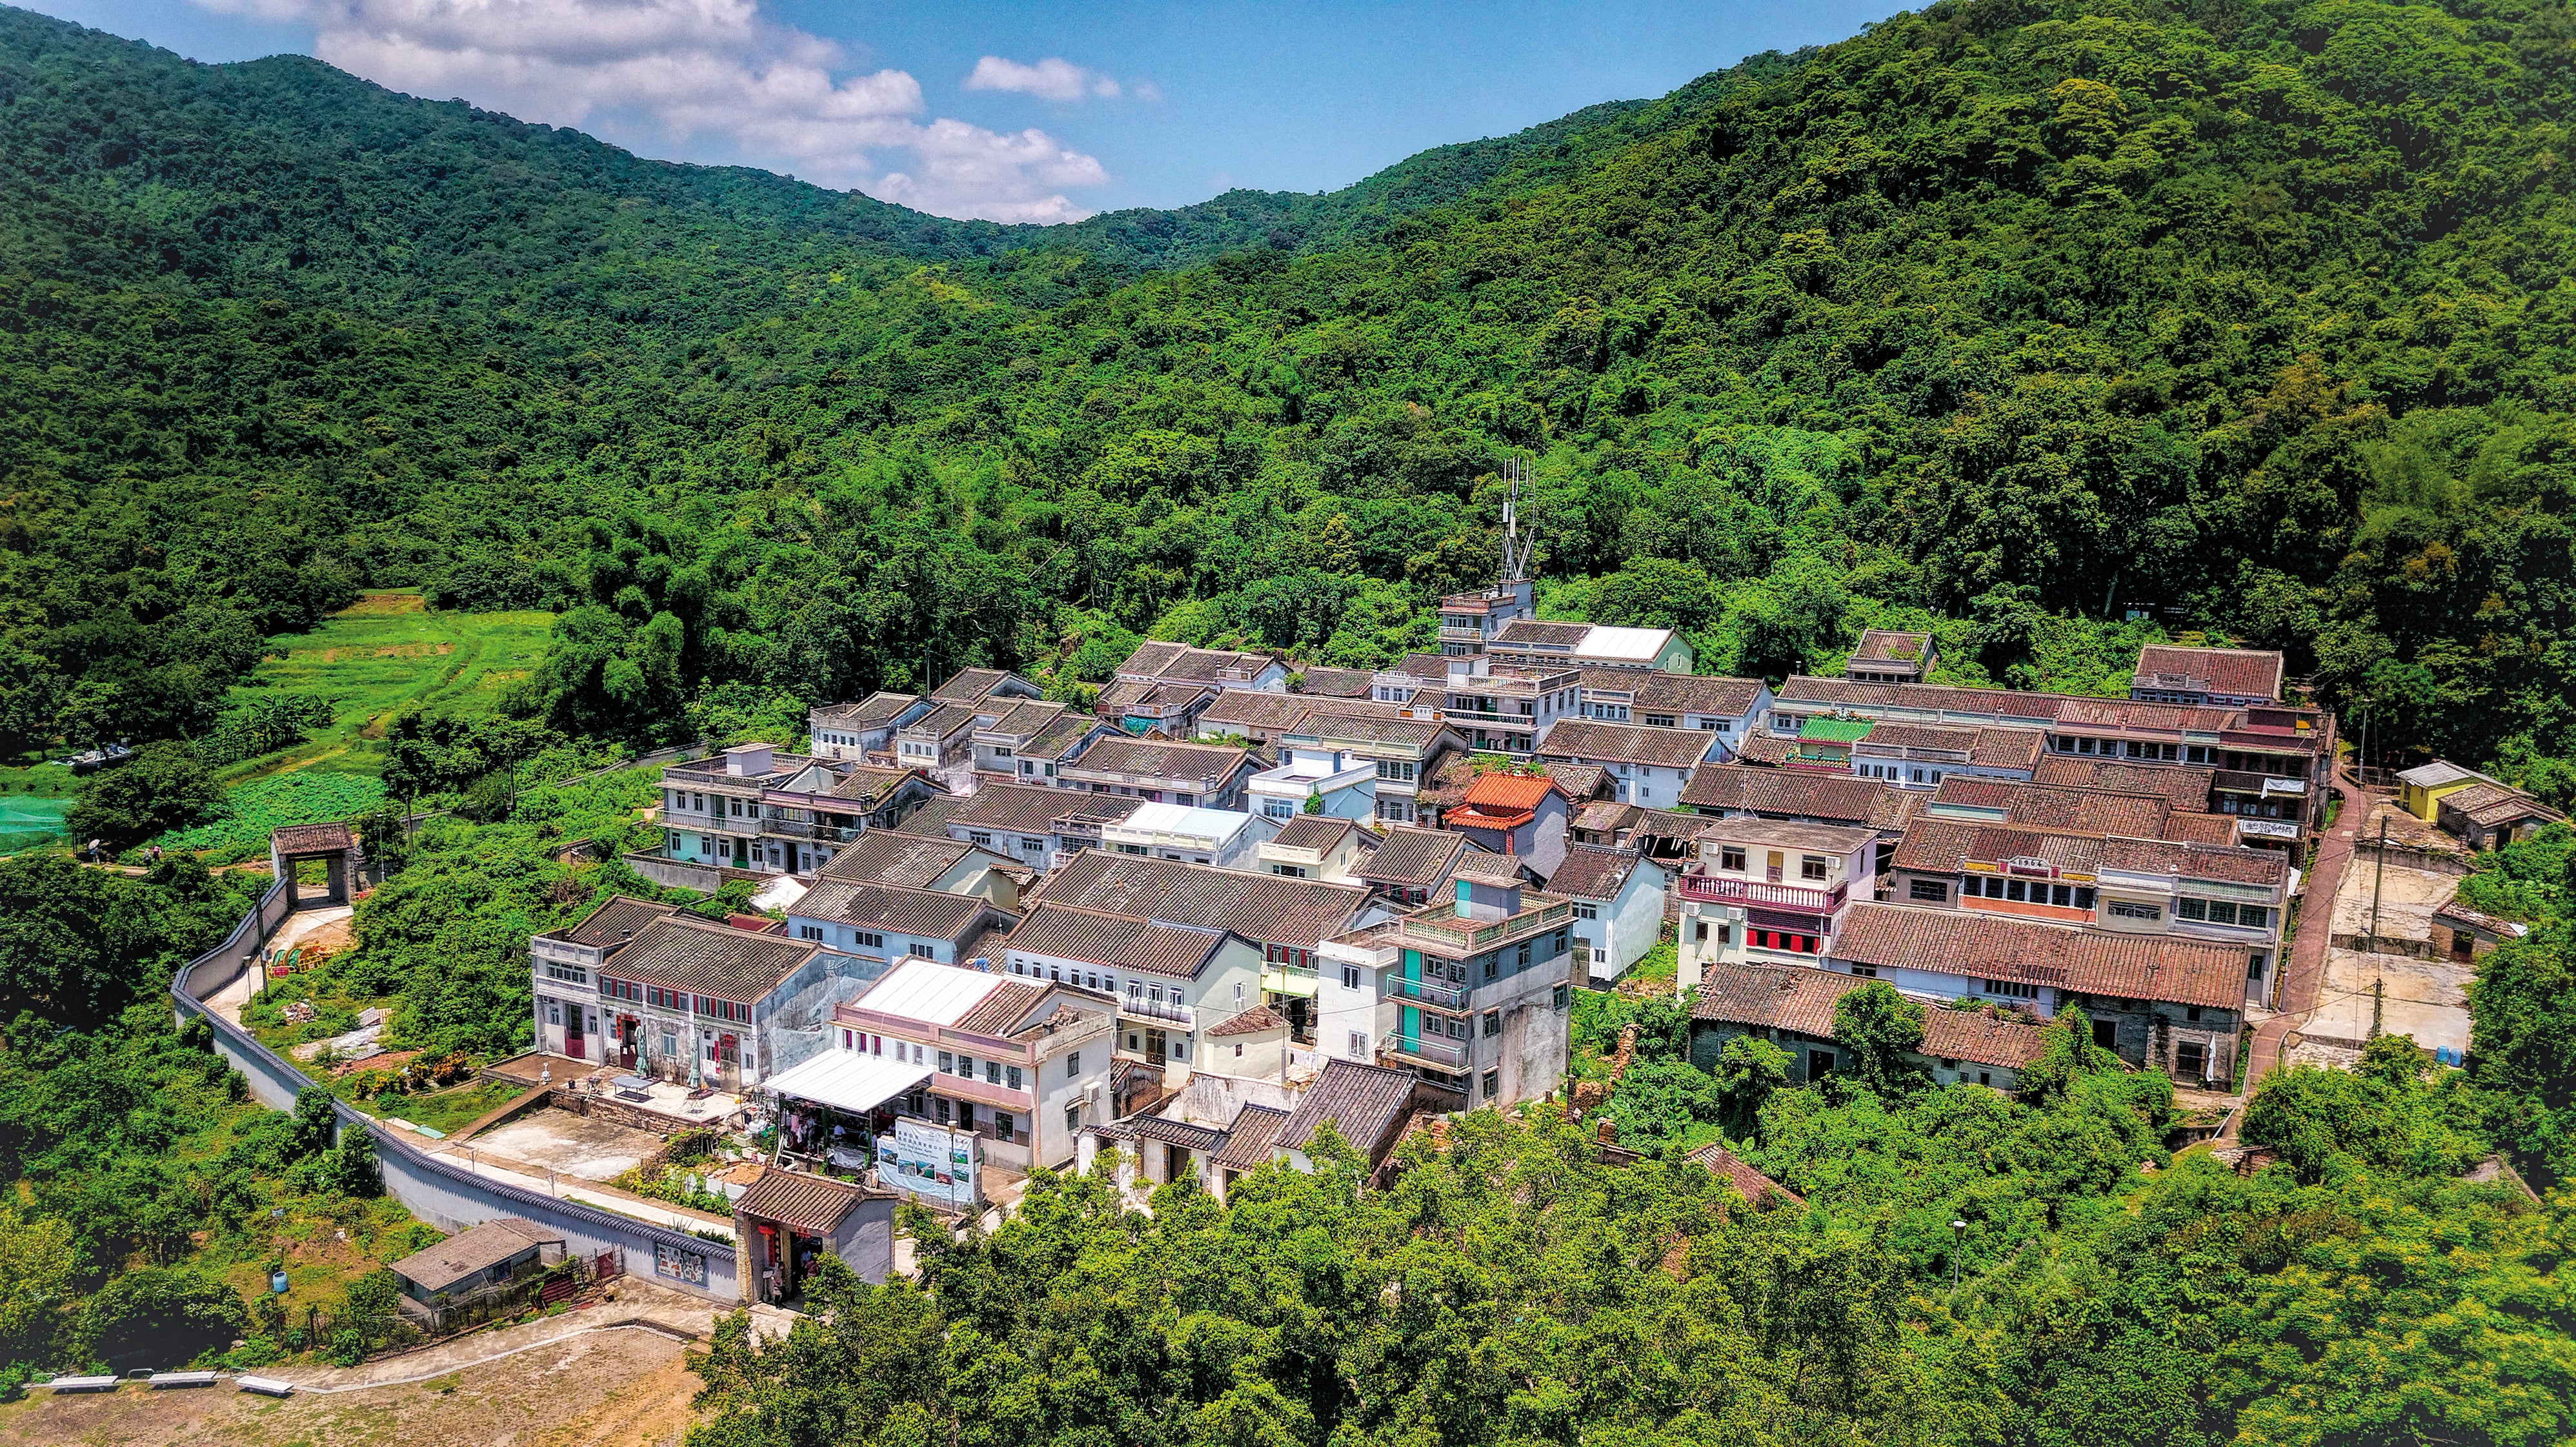 Lai Chi Wo is a wooded wonderland and one of Hong Kong’s best preserved rural settlements